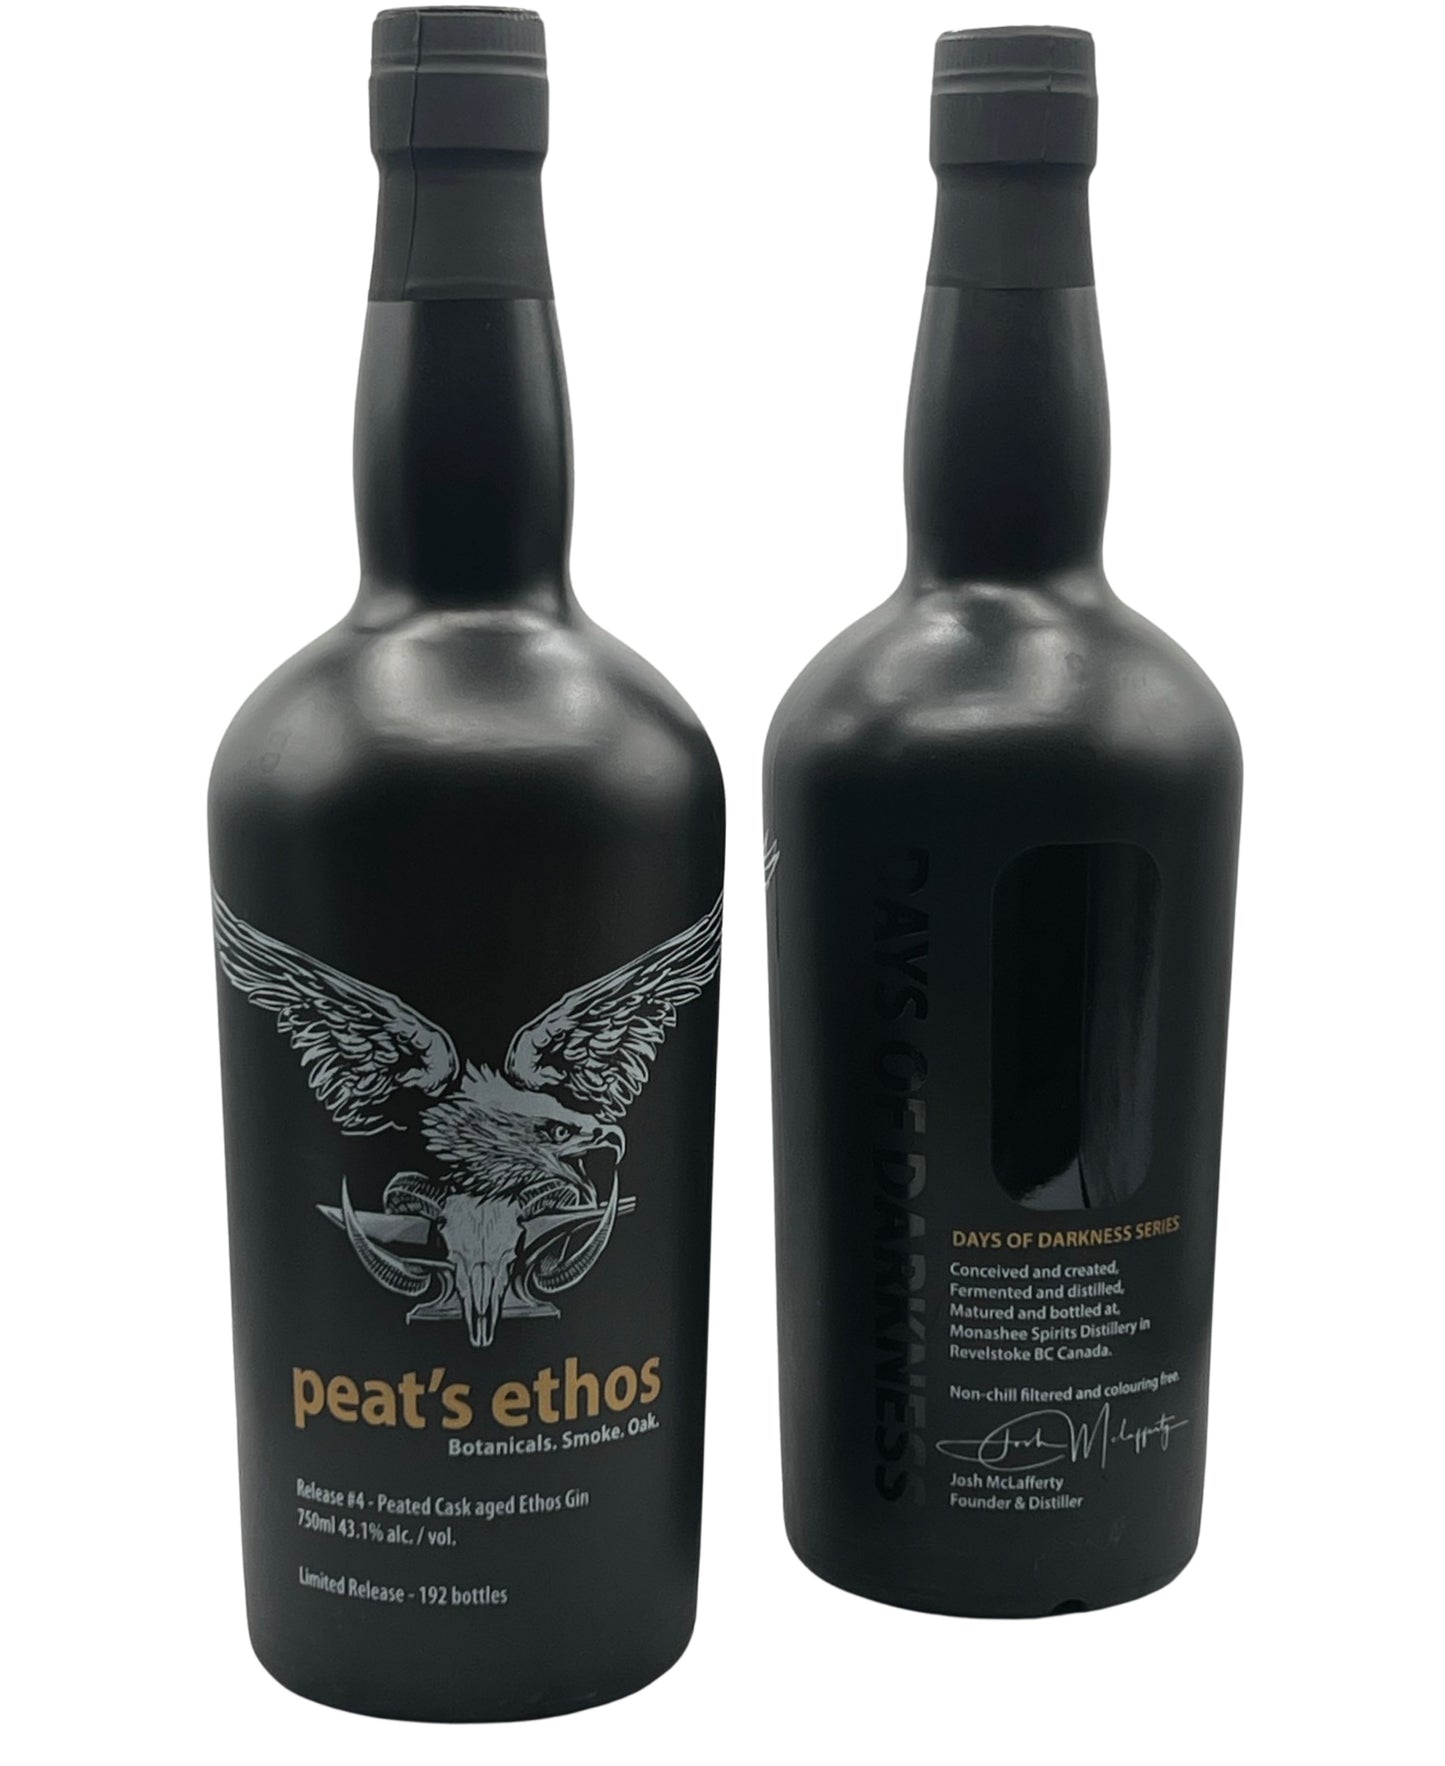 WHISKY - Days of Darkness - Release #3 - Peats Ethos - Peated Cask aged Gin